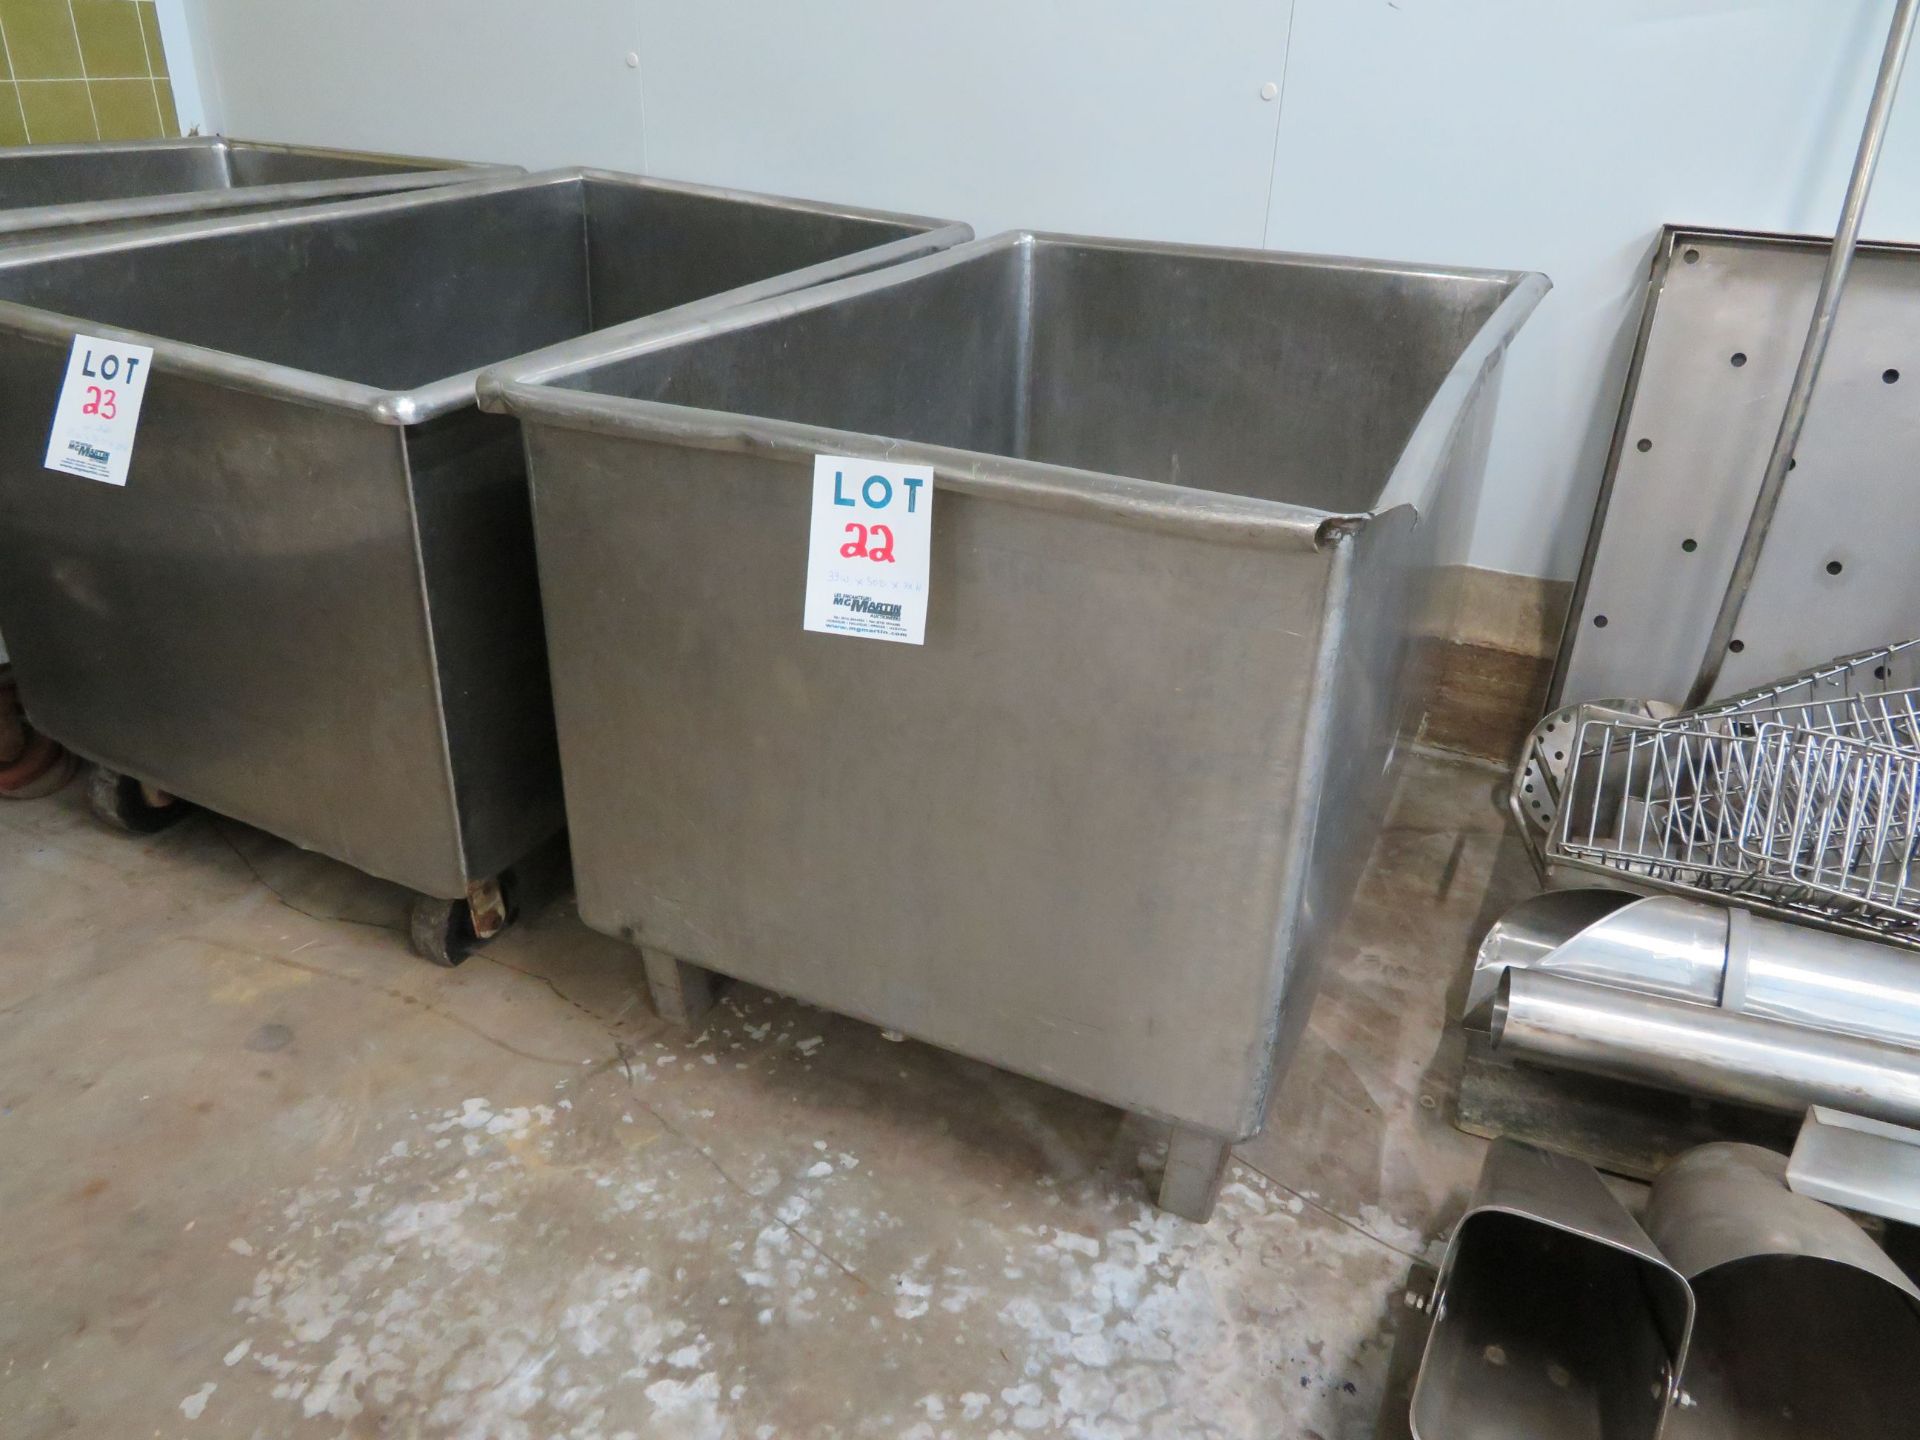 Stainless steel tub approx. 33"w x 50"d x 30"h